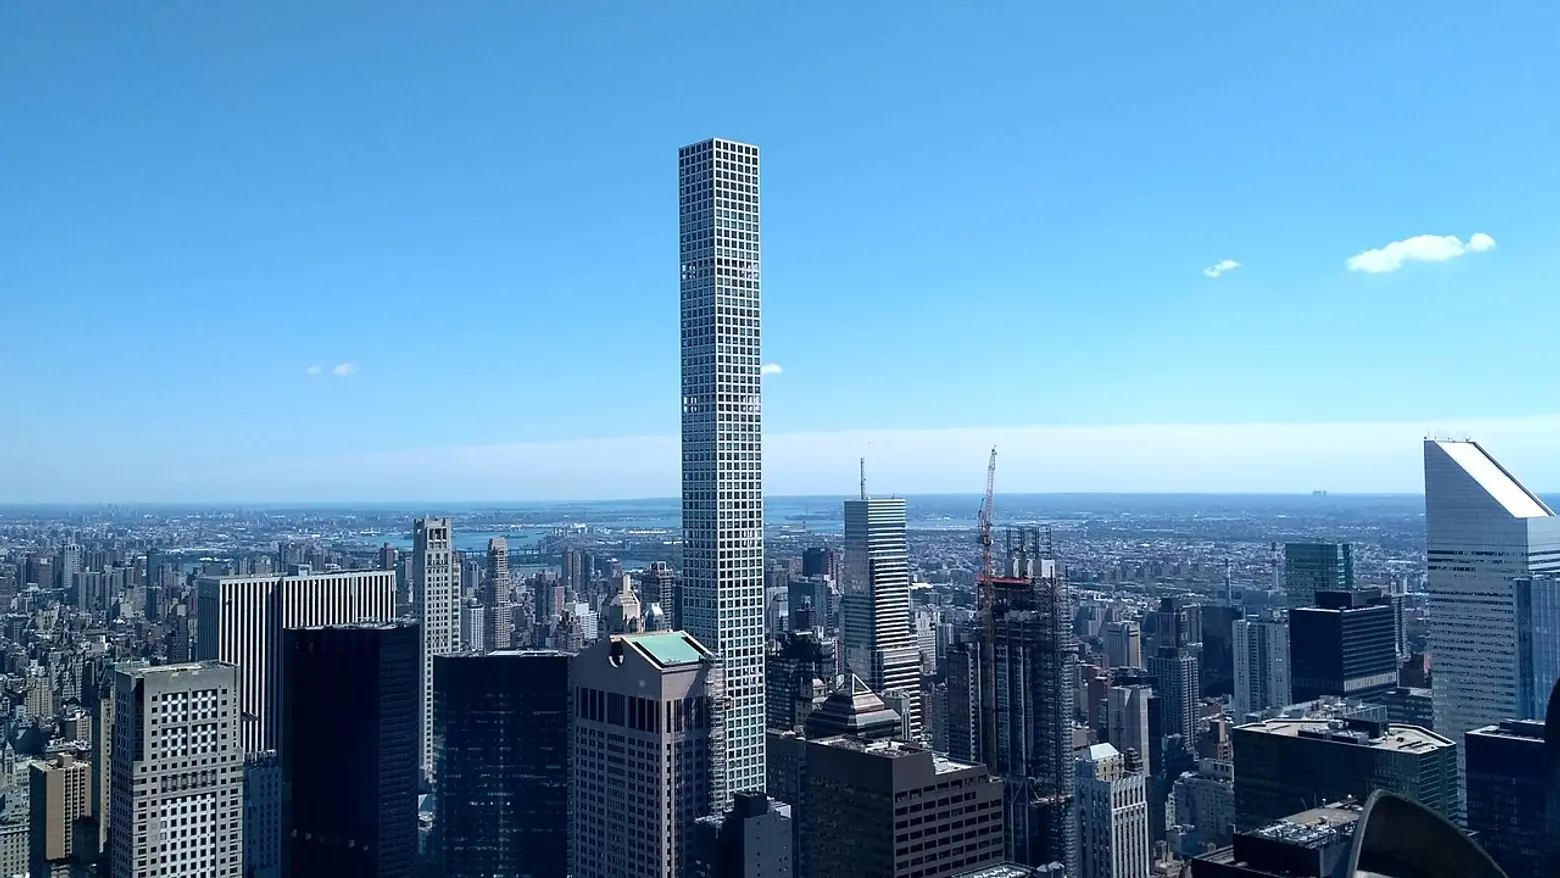 Top-floor penthouse at 432 Park lists for $169M, double the previous sale price